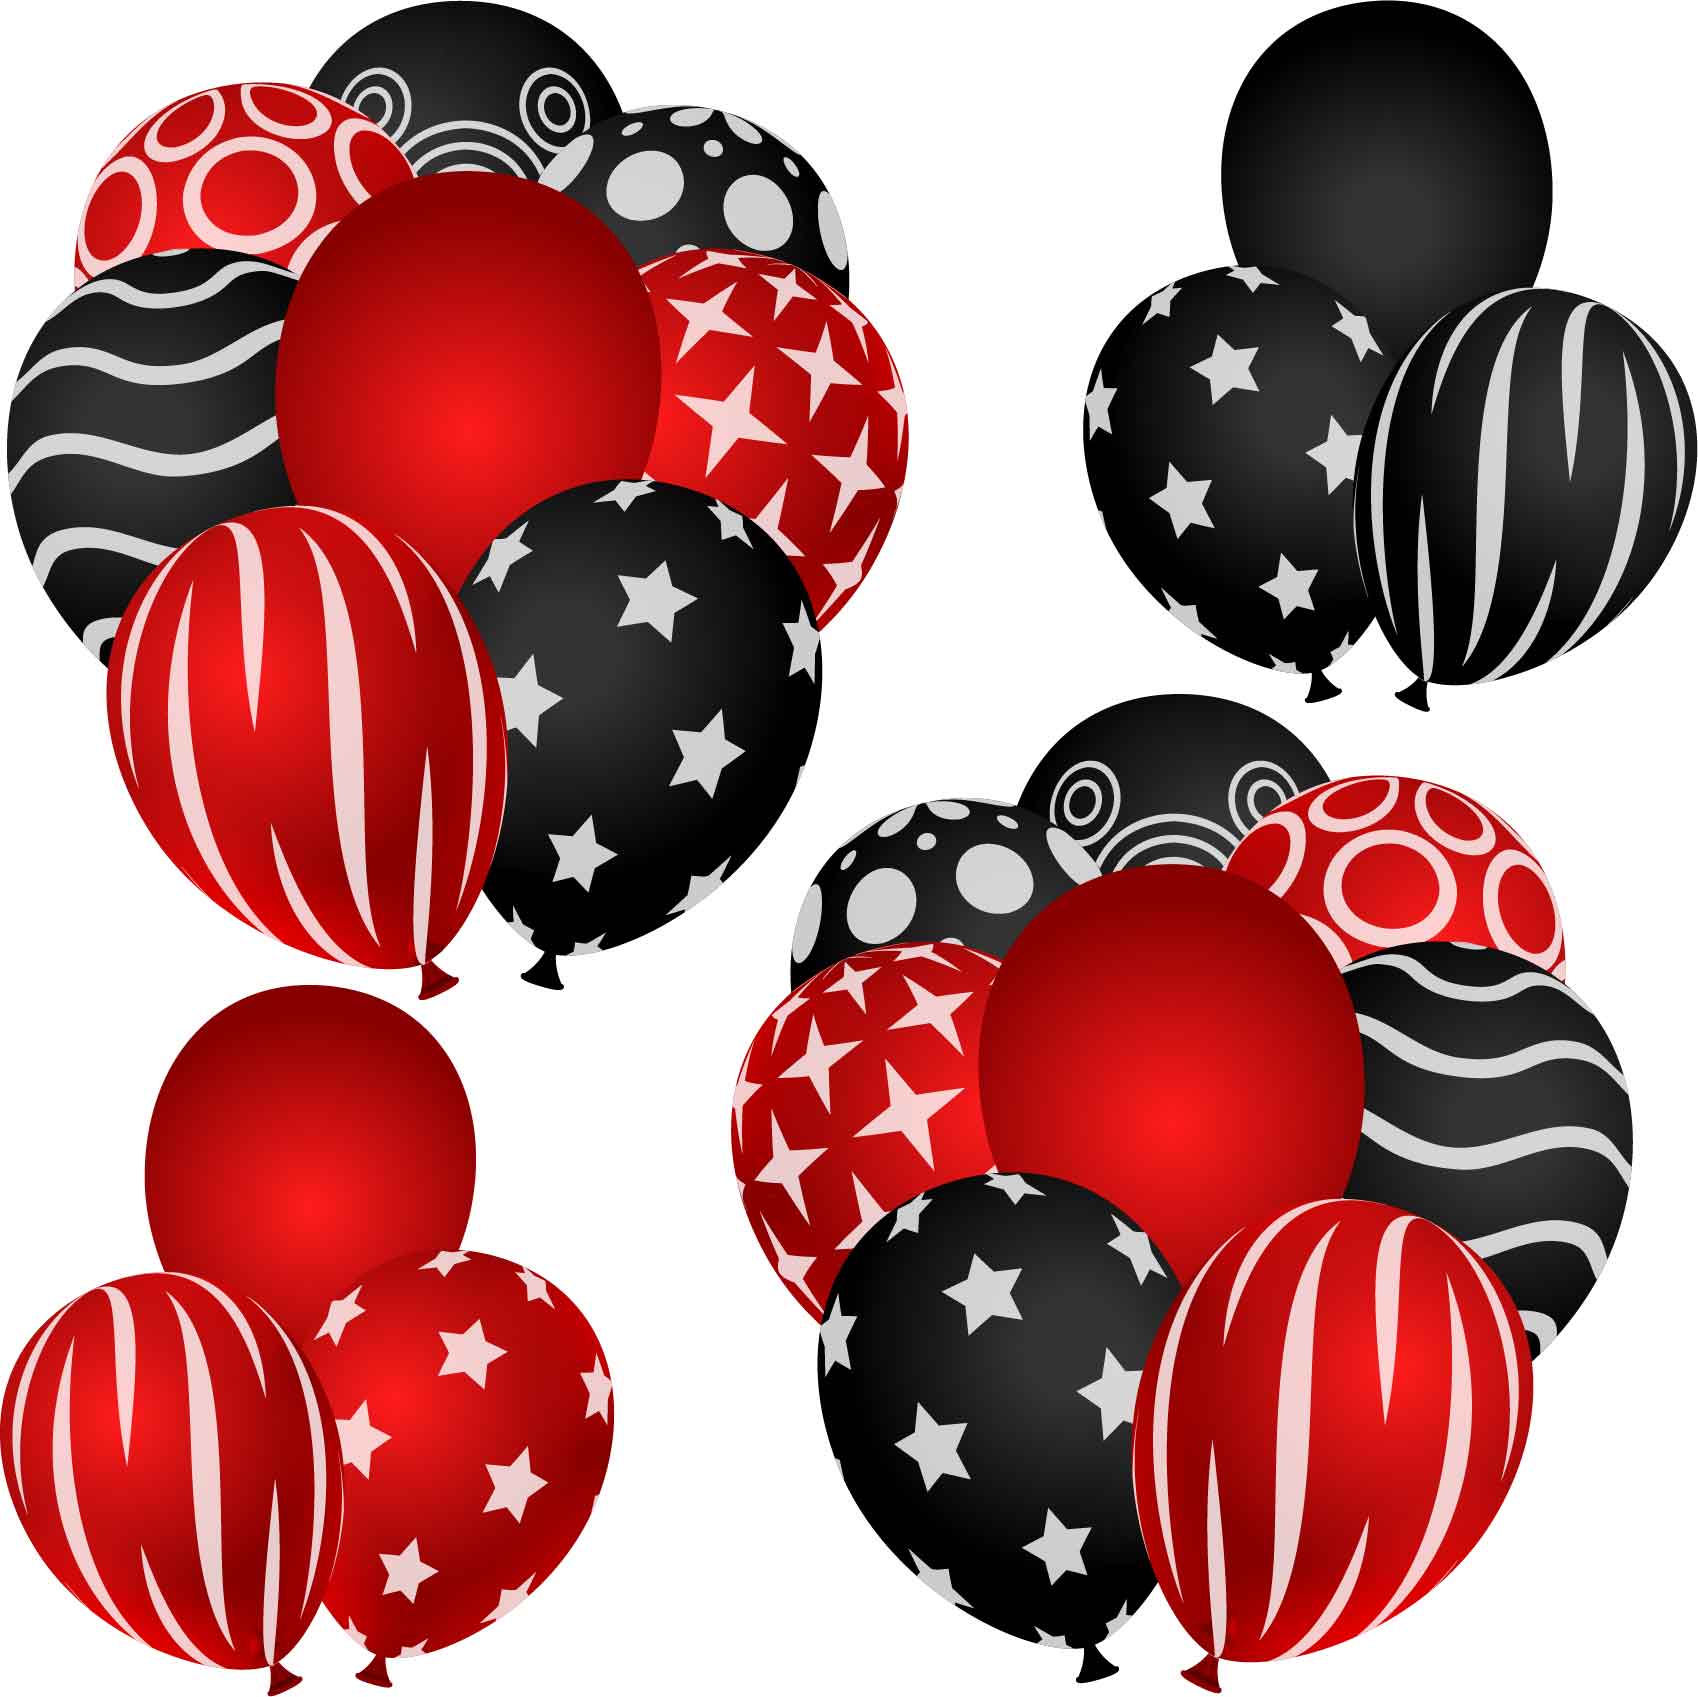 A Halloween themed Sweet 16 party! Red and black backdrop, balloon